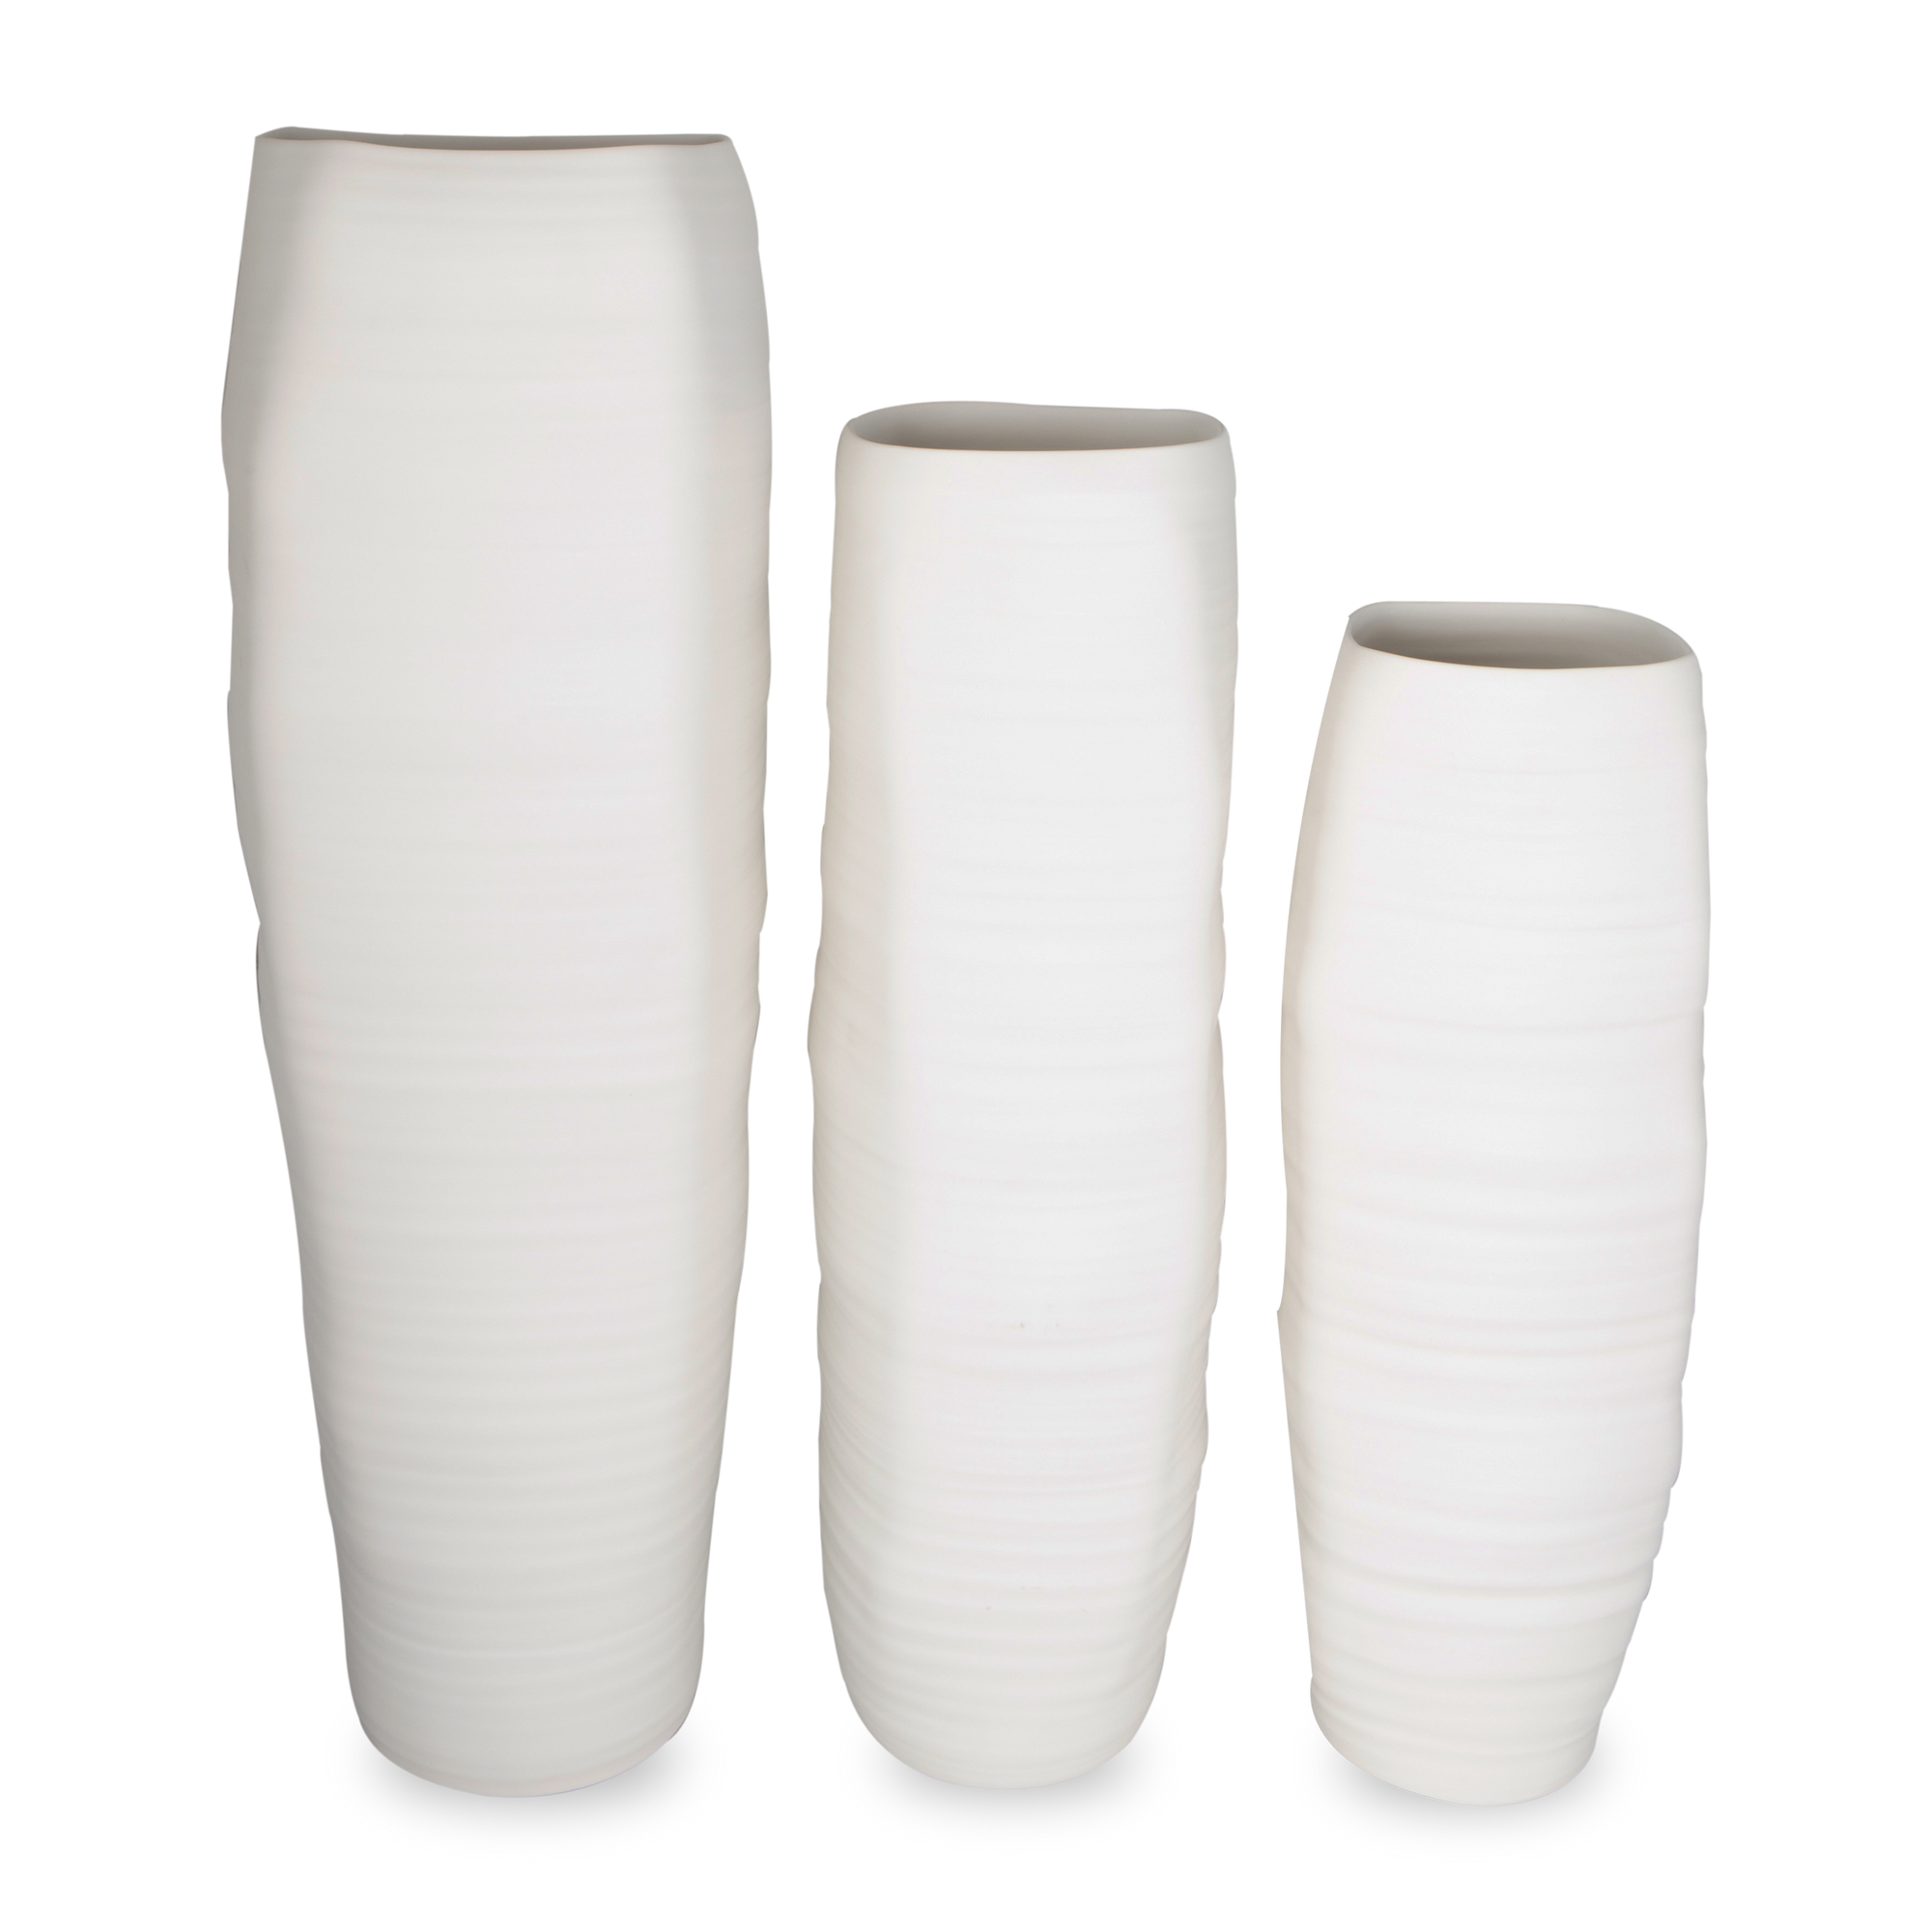 Adding an element of unique contemporary design, the Rock Vase was carefully handcrafted in Italy.